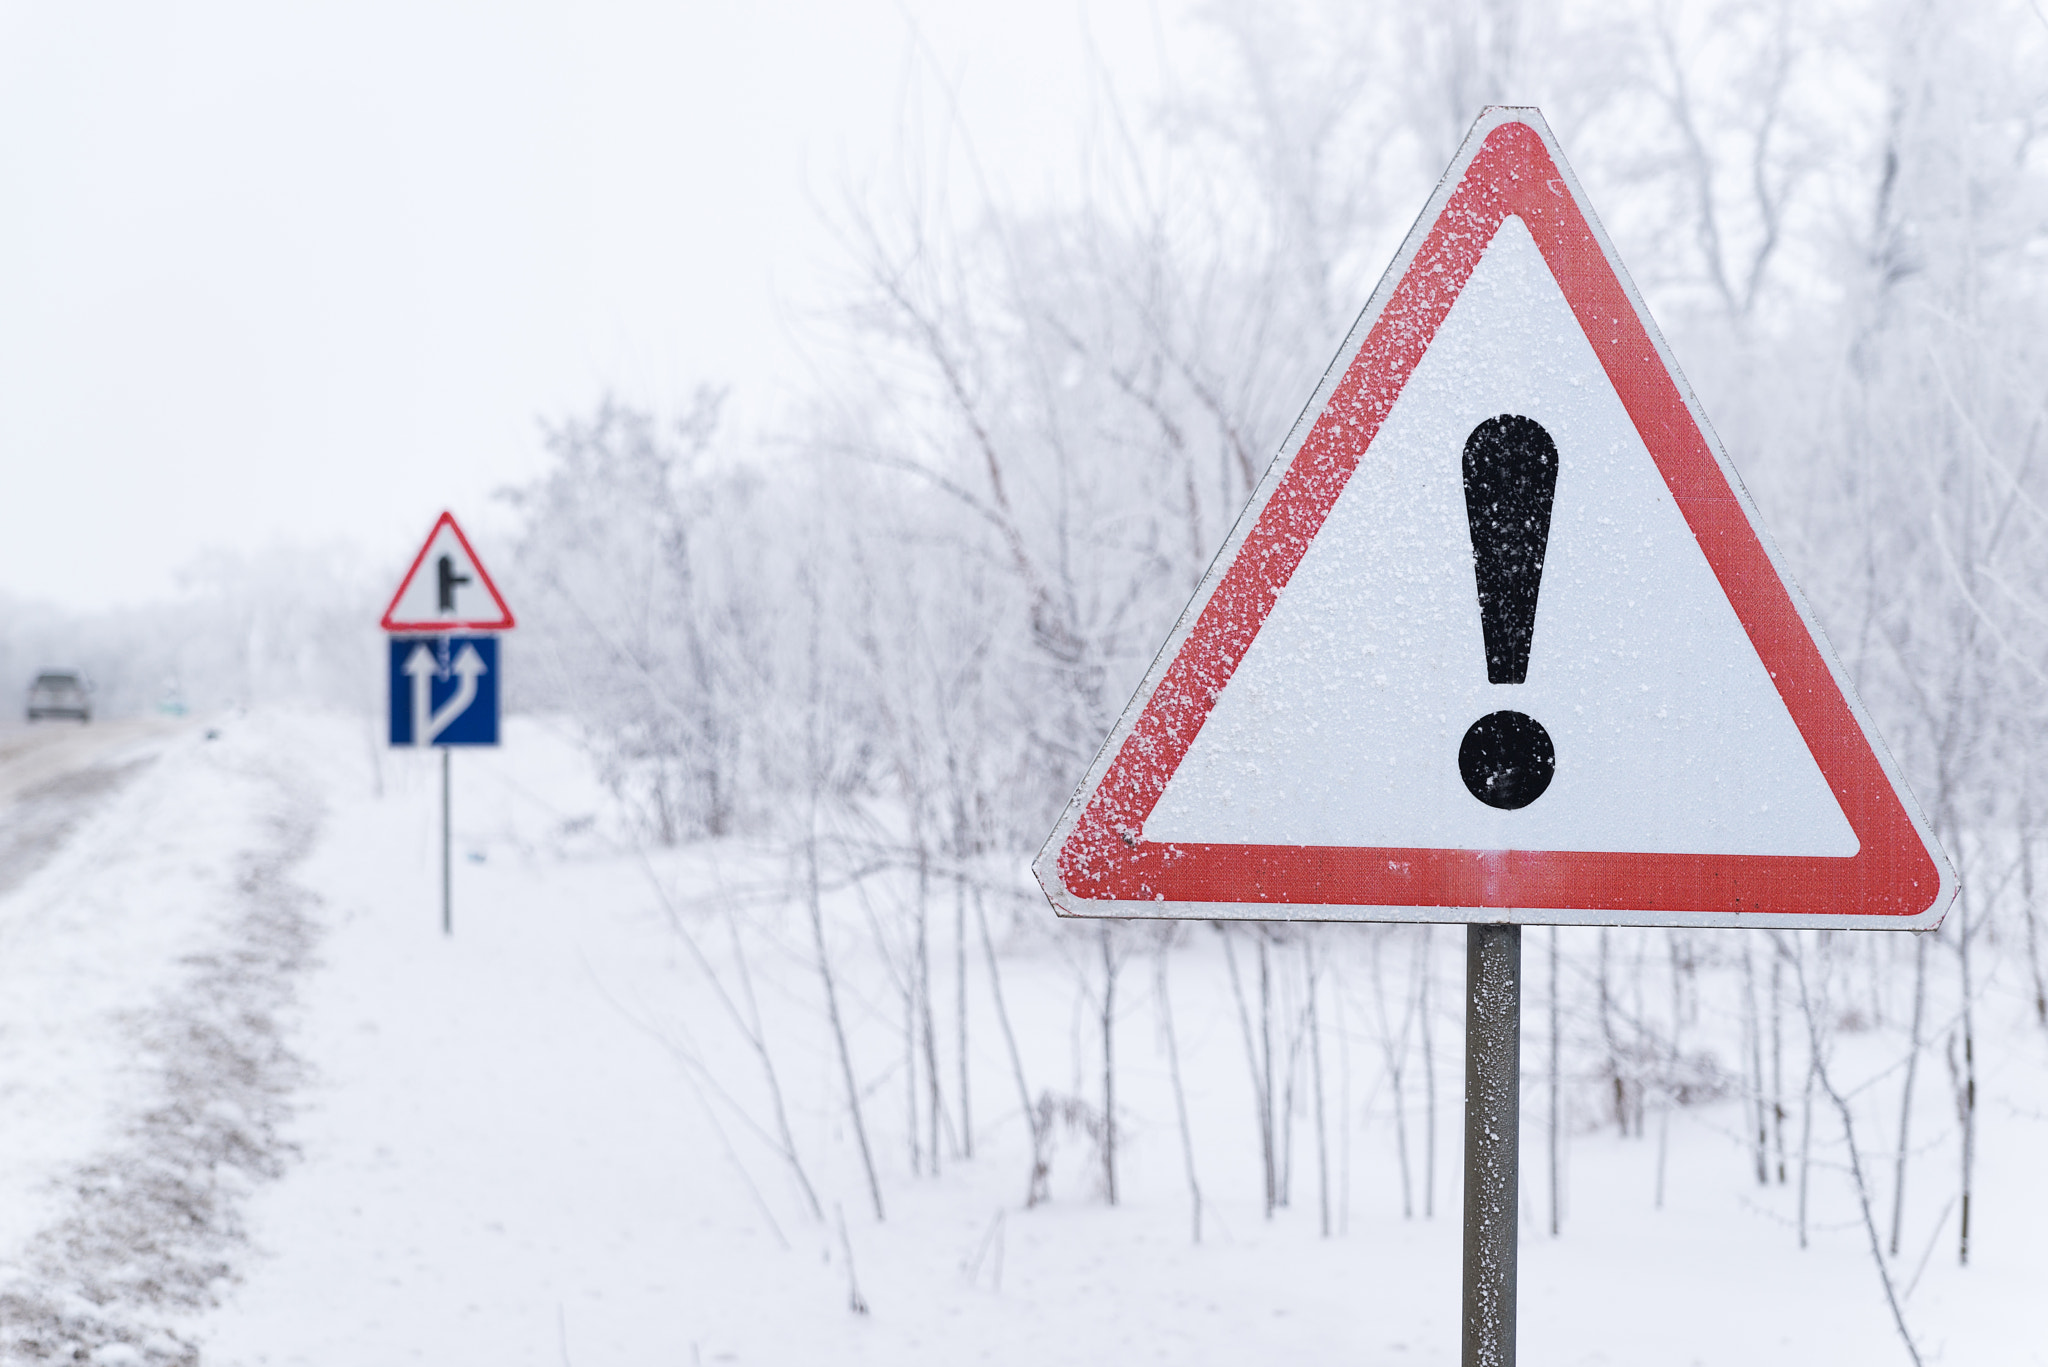 Nikon D800 sample photo. A road sign stands on the snowy roadside photography